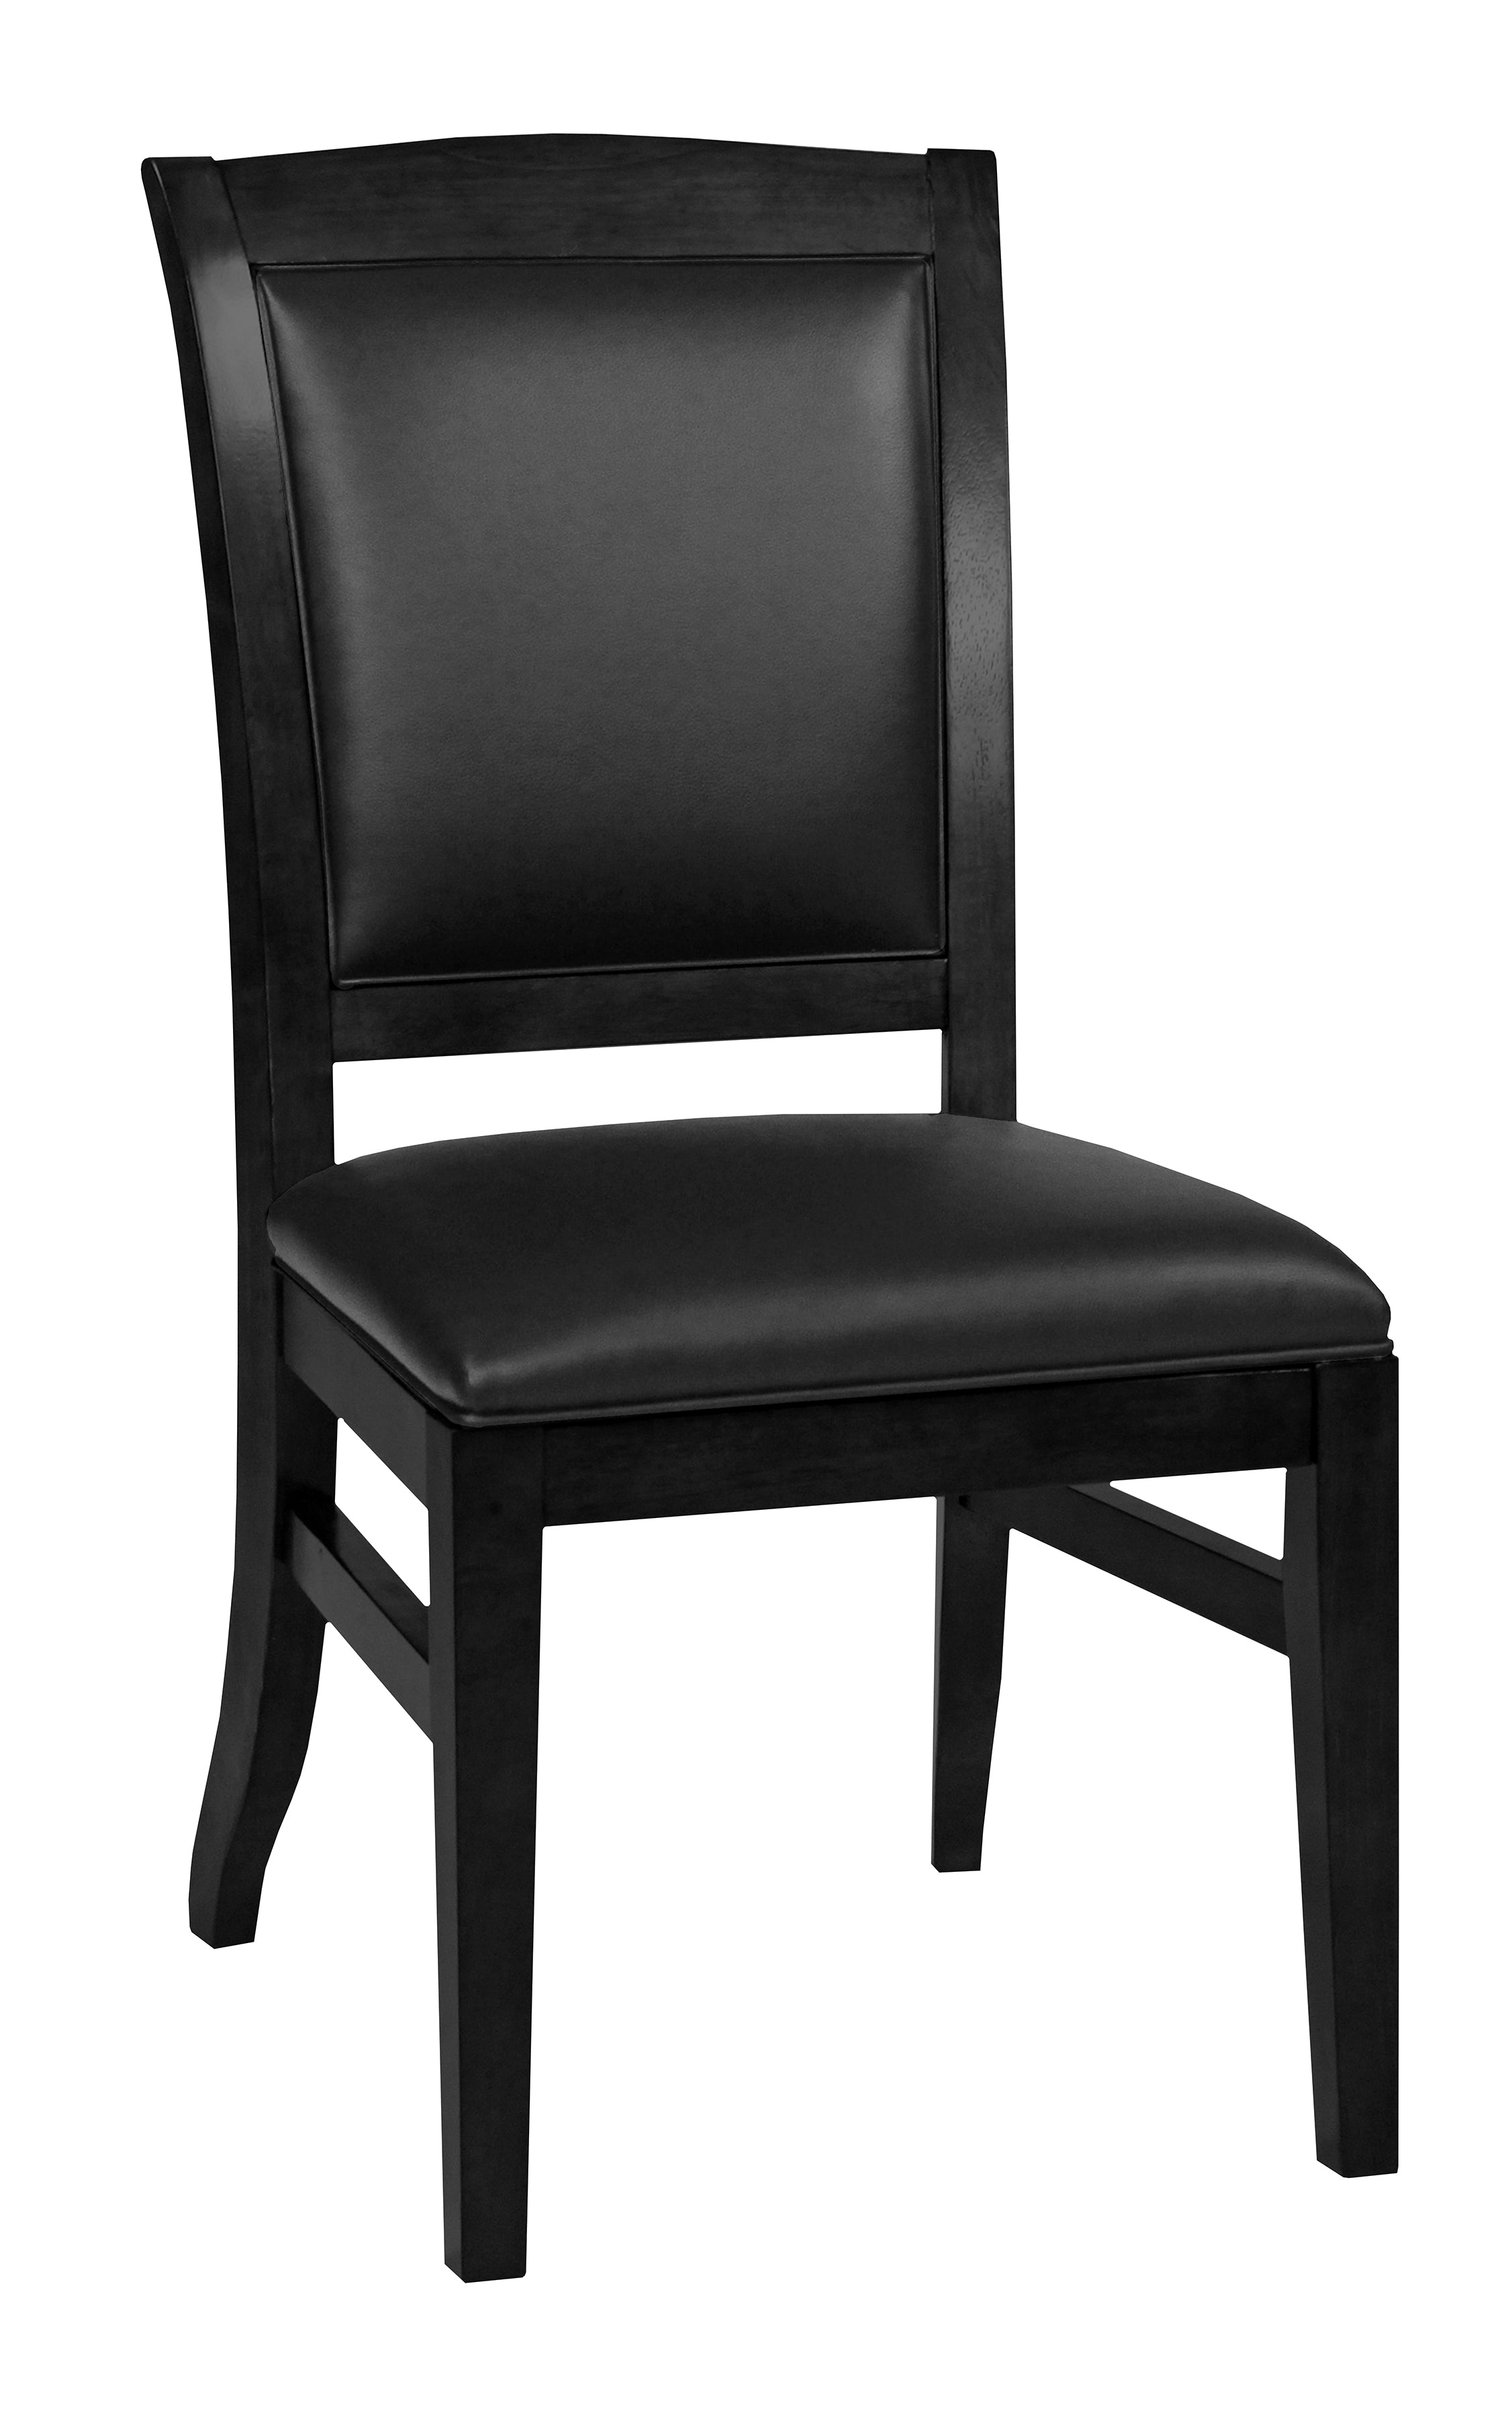 Legacy Billiards Heritage Dining Game Chair in Black Onyx Finish